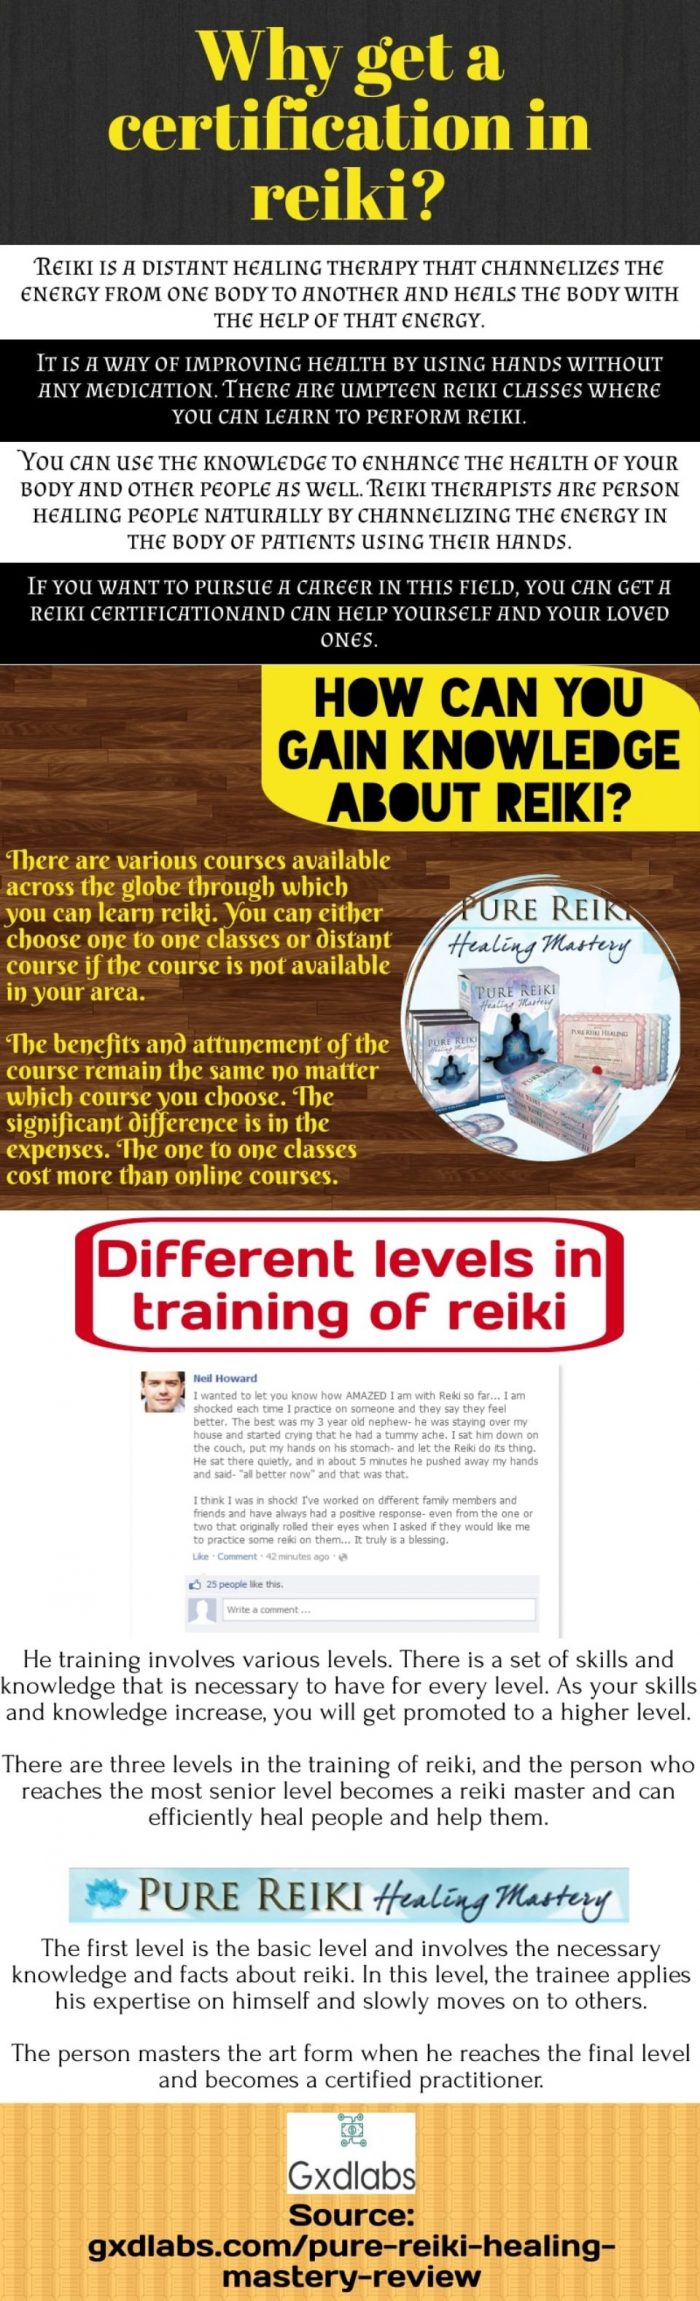 How can you gain knowledge about reiki?